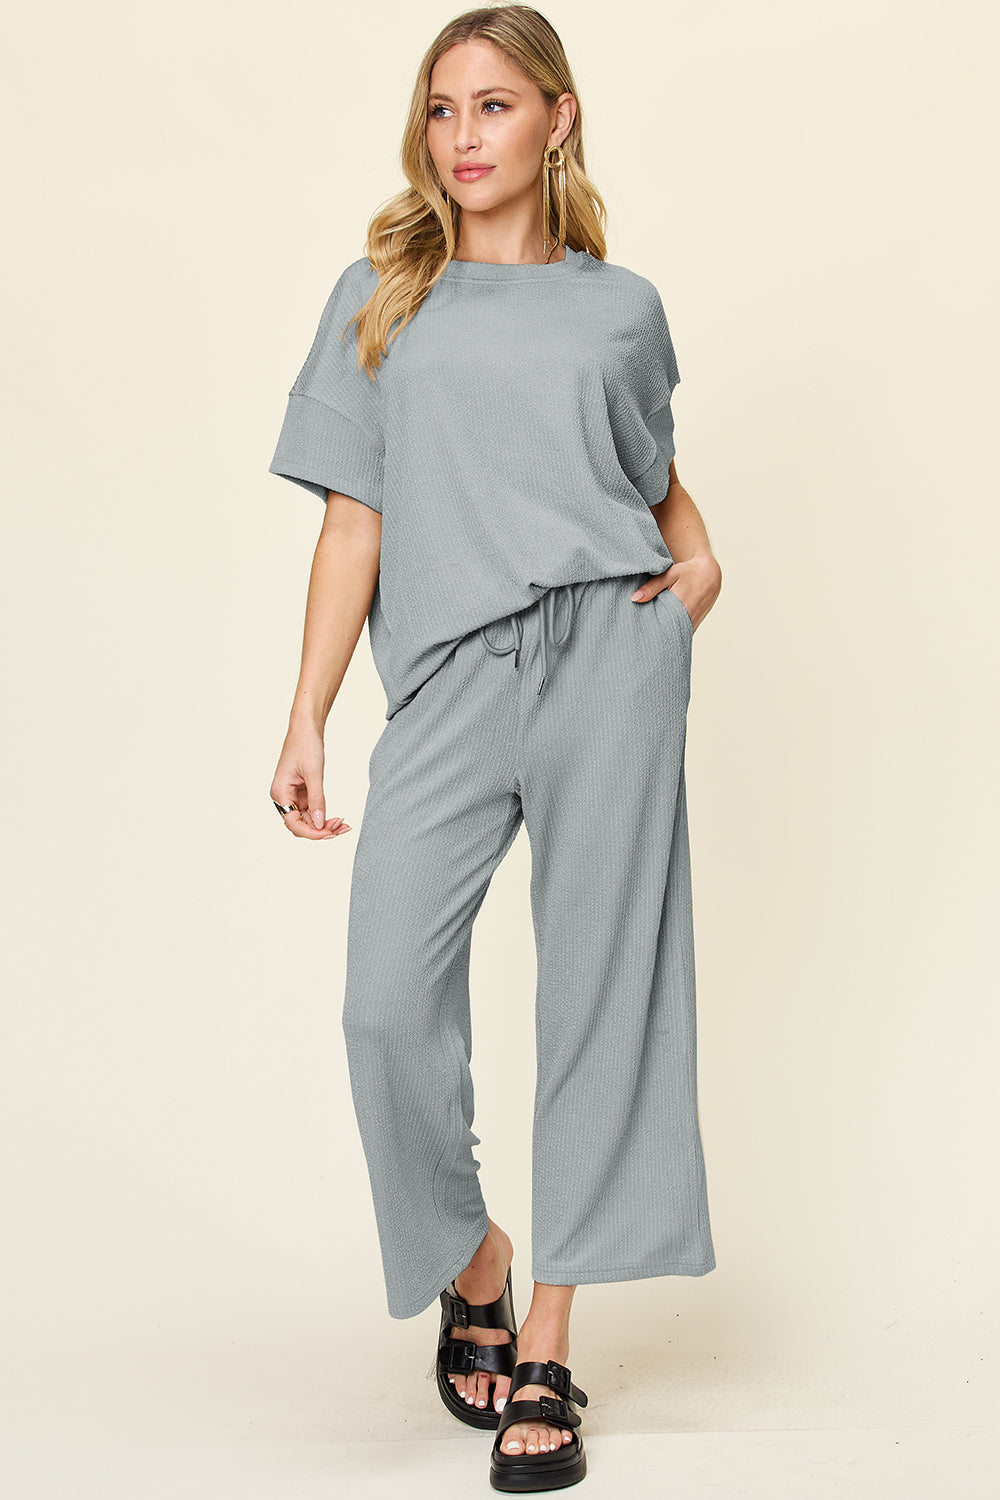 Texture Round Neck Short Sleeve T-Shirt and Wide Leg Pants - 6 colors